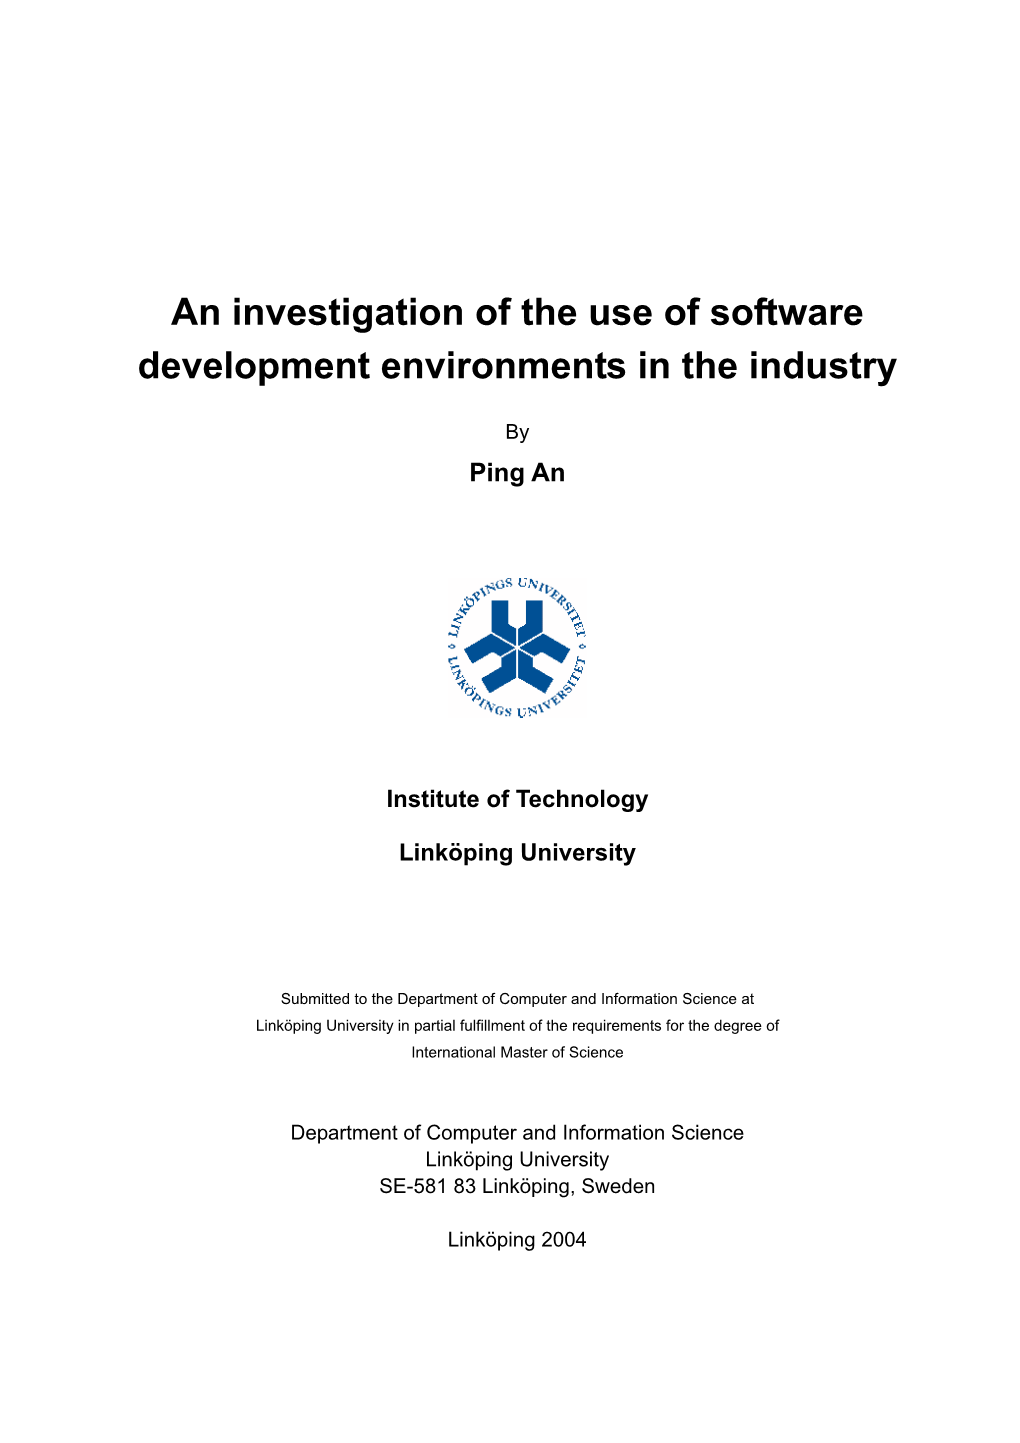 An Investigation of the Use of Software Development Environments in the Industry